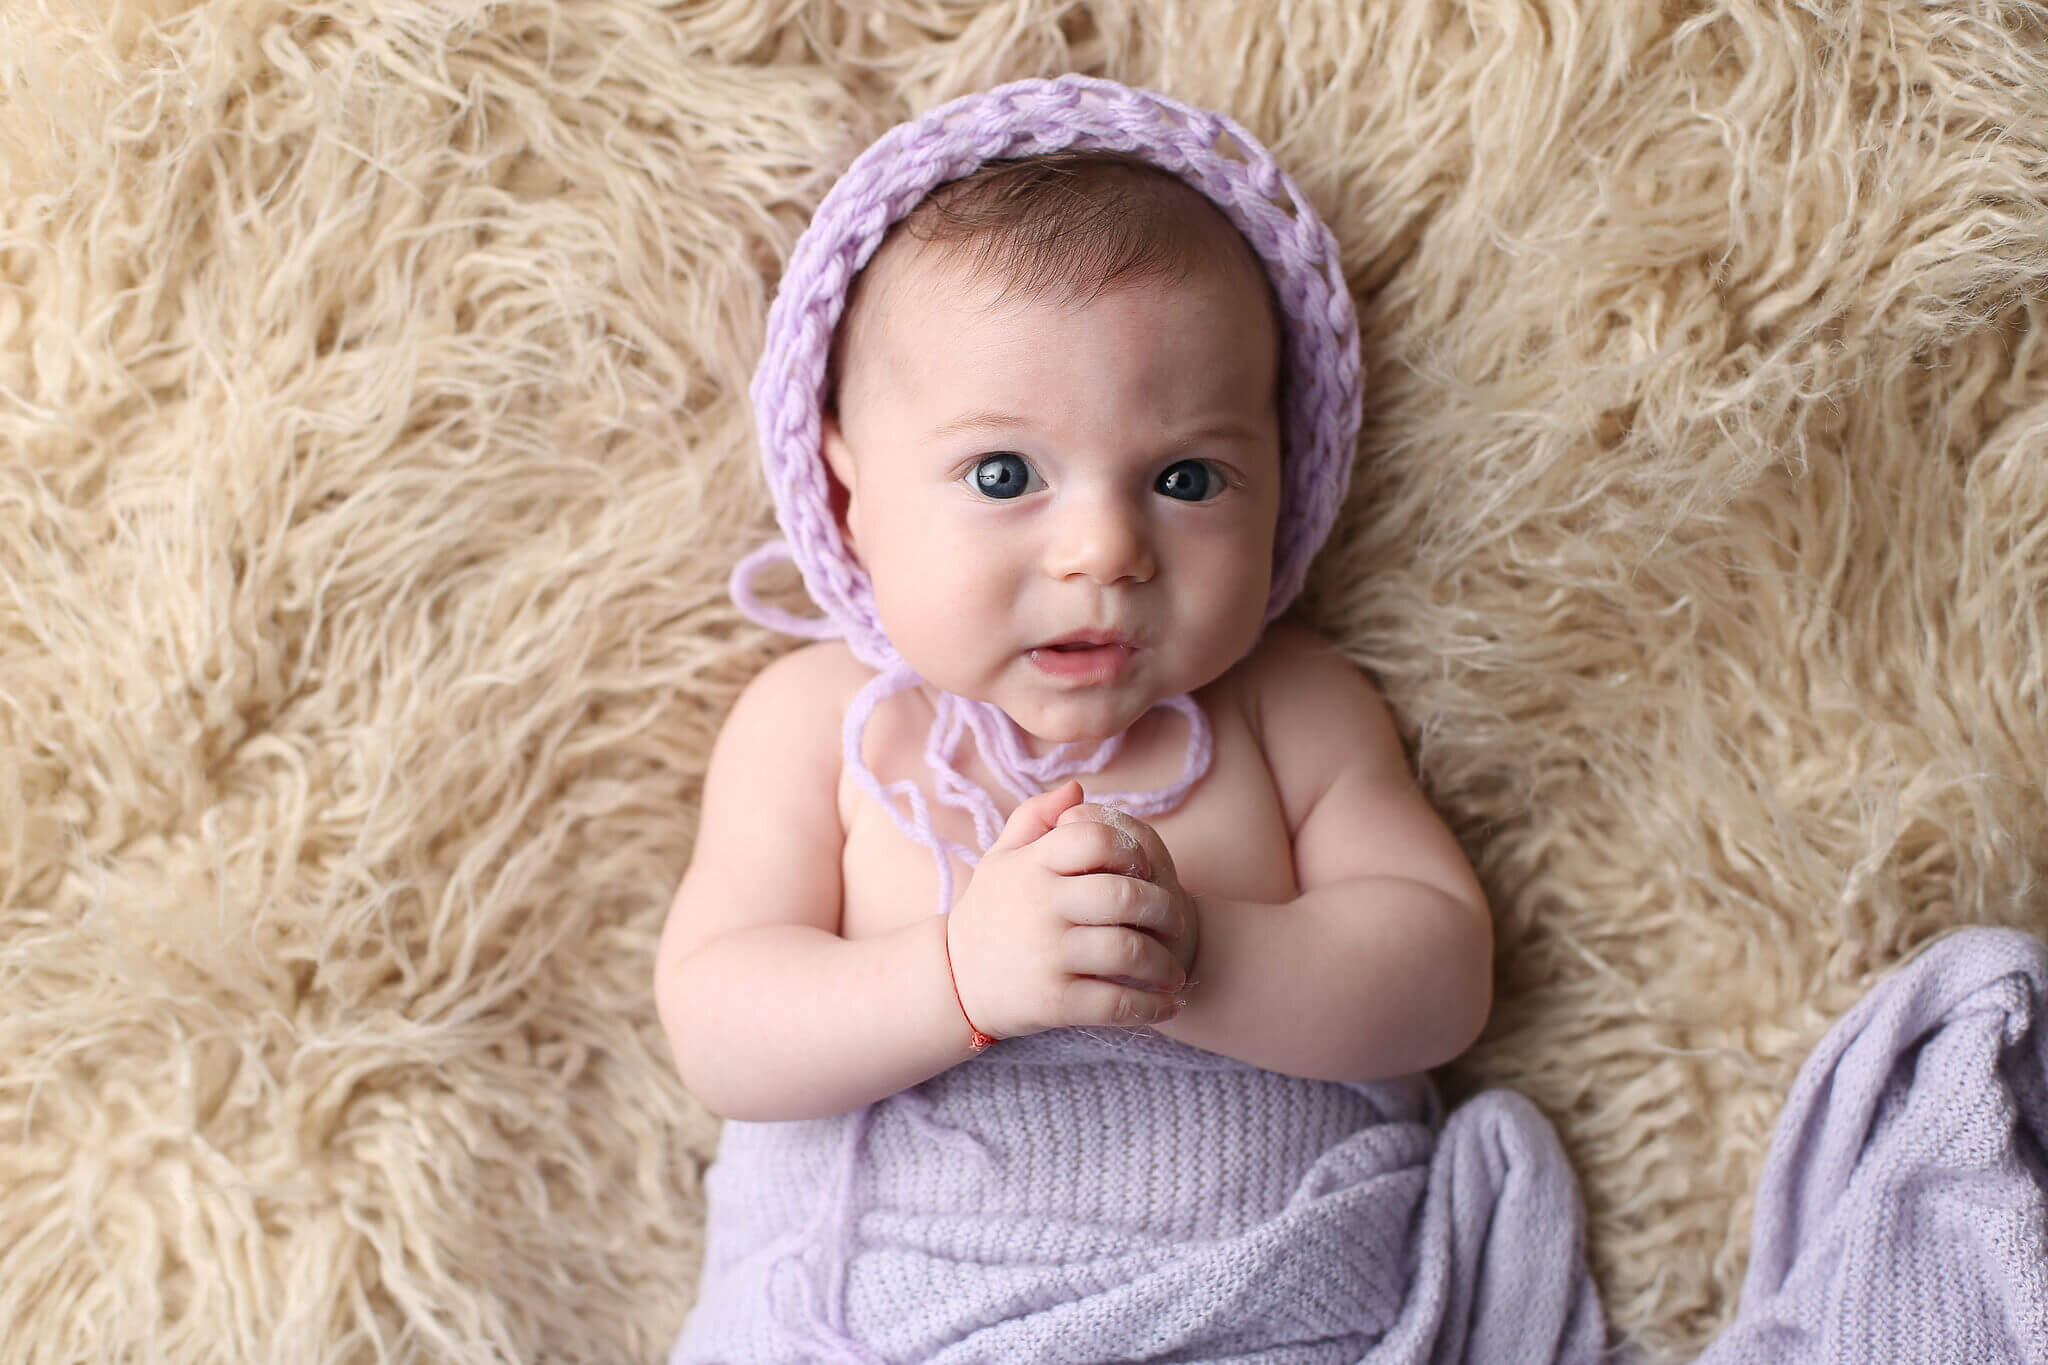  A picture of a tiny baby girl in her knitted cap and blanket, lying on a shaggy rug and holding her hands together as she looks up with her sweet face by Photography by L Rose, baby photography in San Diego CA 